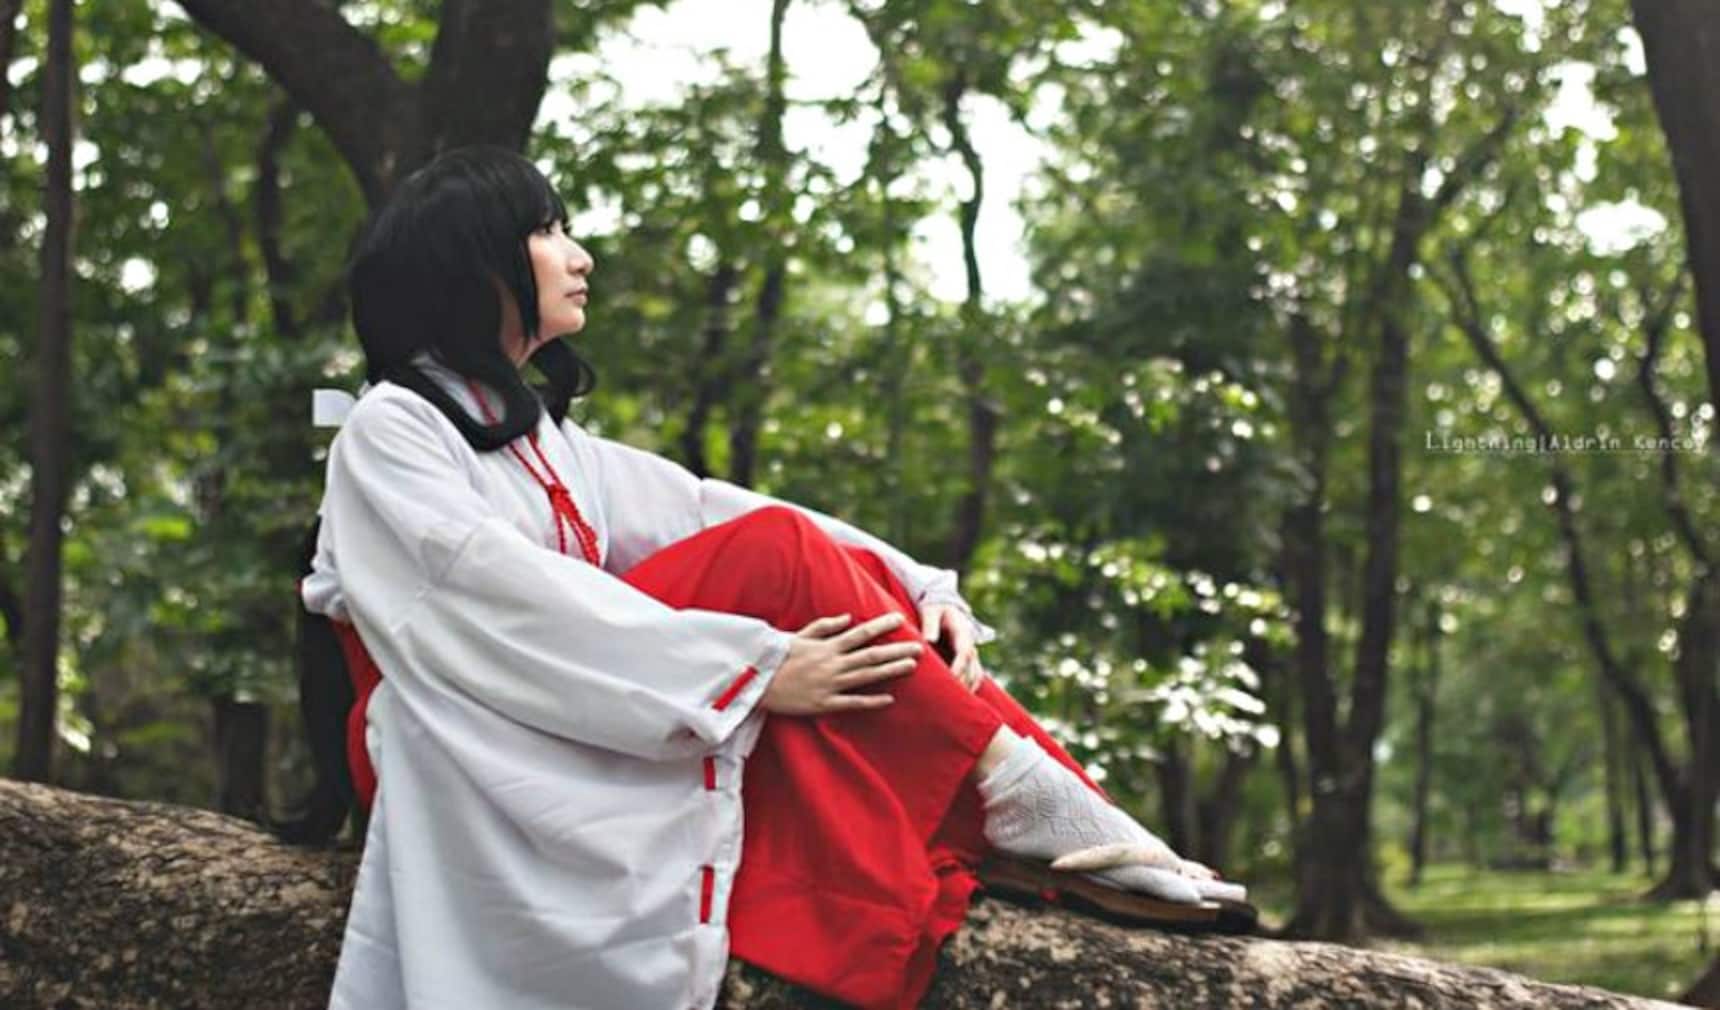 Think You're Cut Out to Be a Shrine Maiden?